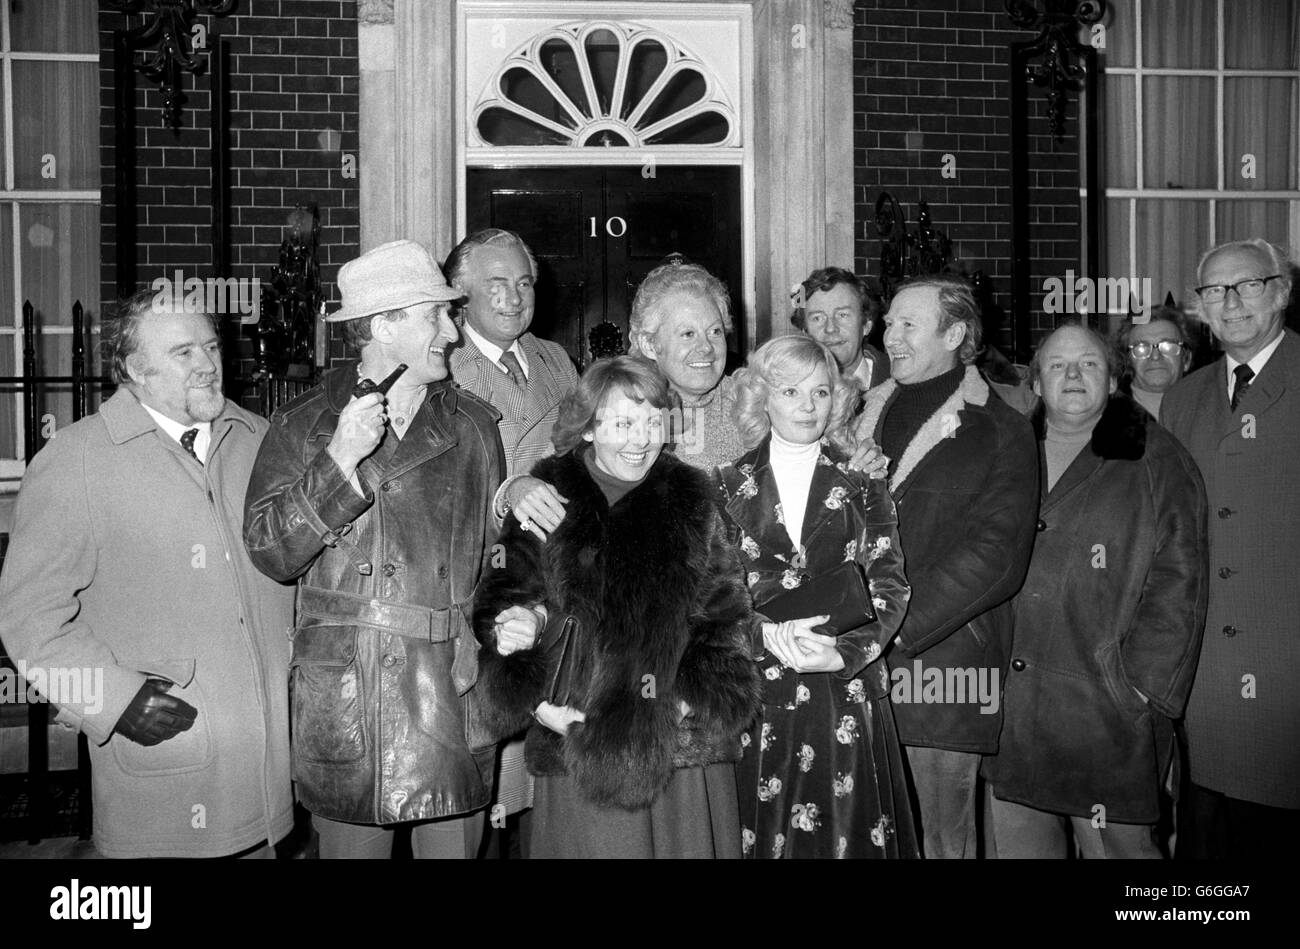 A group of show business personalities outside 10 Downing Street, where they handed in a petition opposing British Rail's decision to close down the train service on Boxing Day, and possibly preventing visits to theatres and cinemas. They include (from second left) Ron Moody, Derek Bond, Lulu, Danny La Rue, Sheila White, Richard Briers, Leslie Phillips and Roy Kinnear. Stock Photo